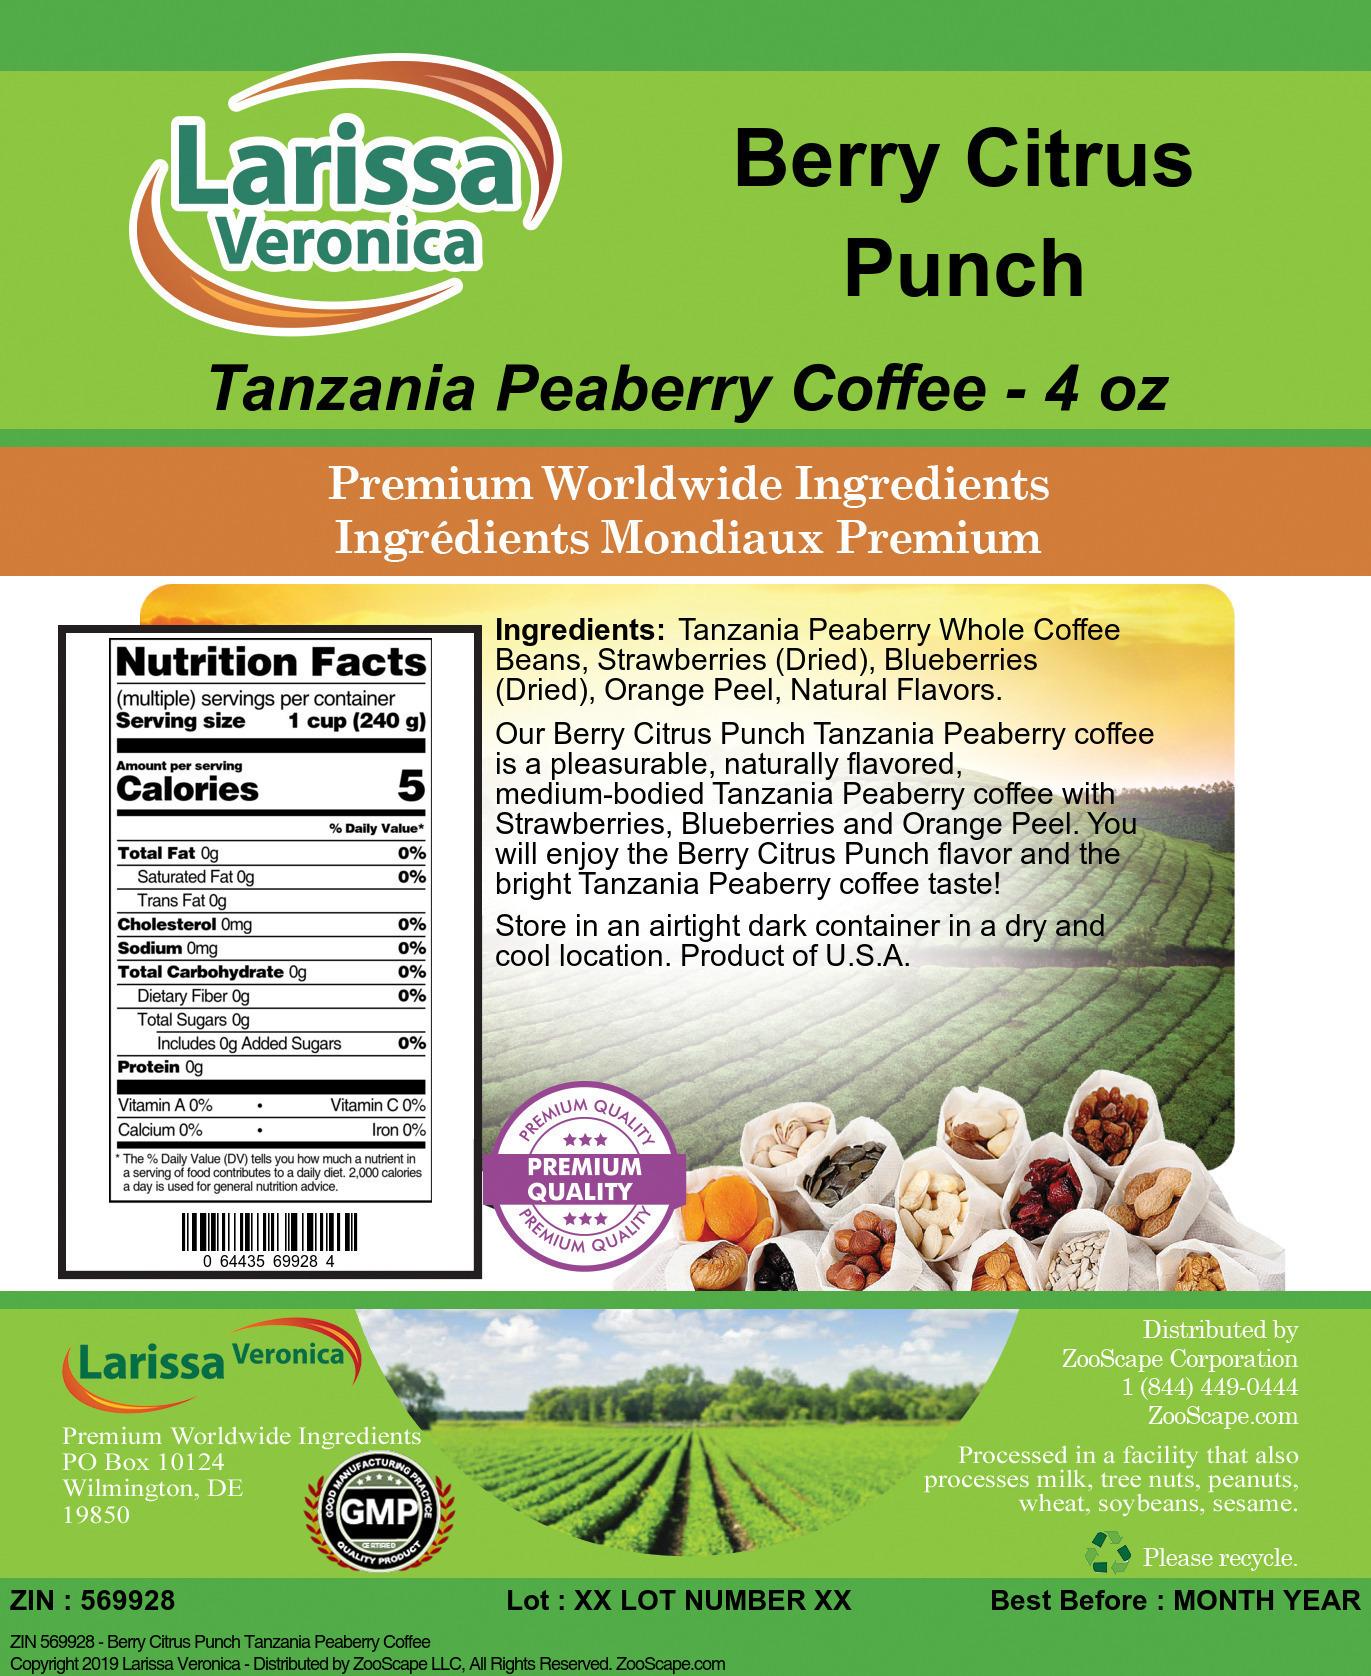 Berry Citrus Punch Tanzania Peaberry Coffee - Label